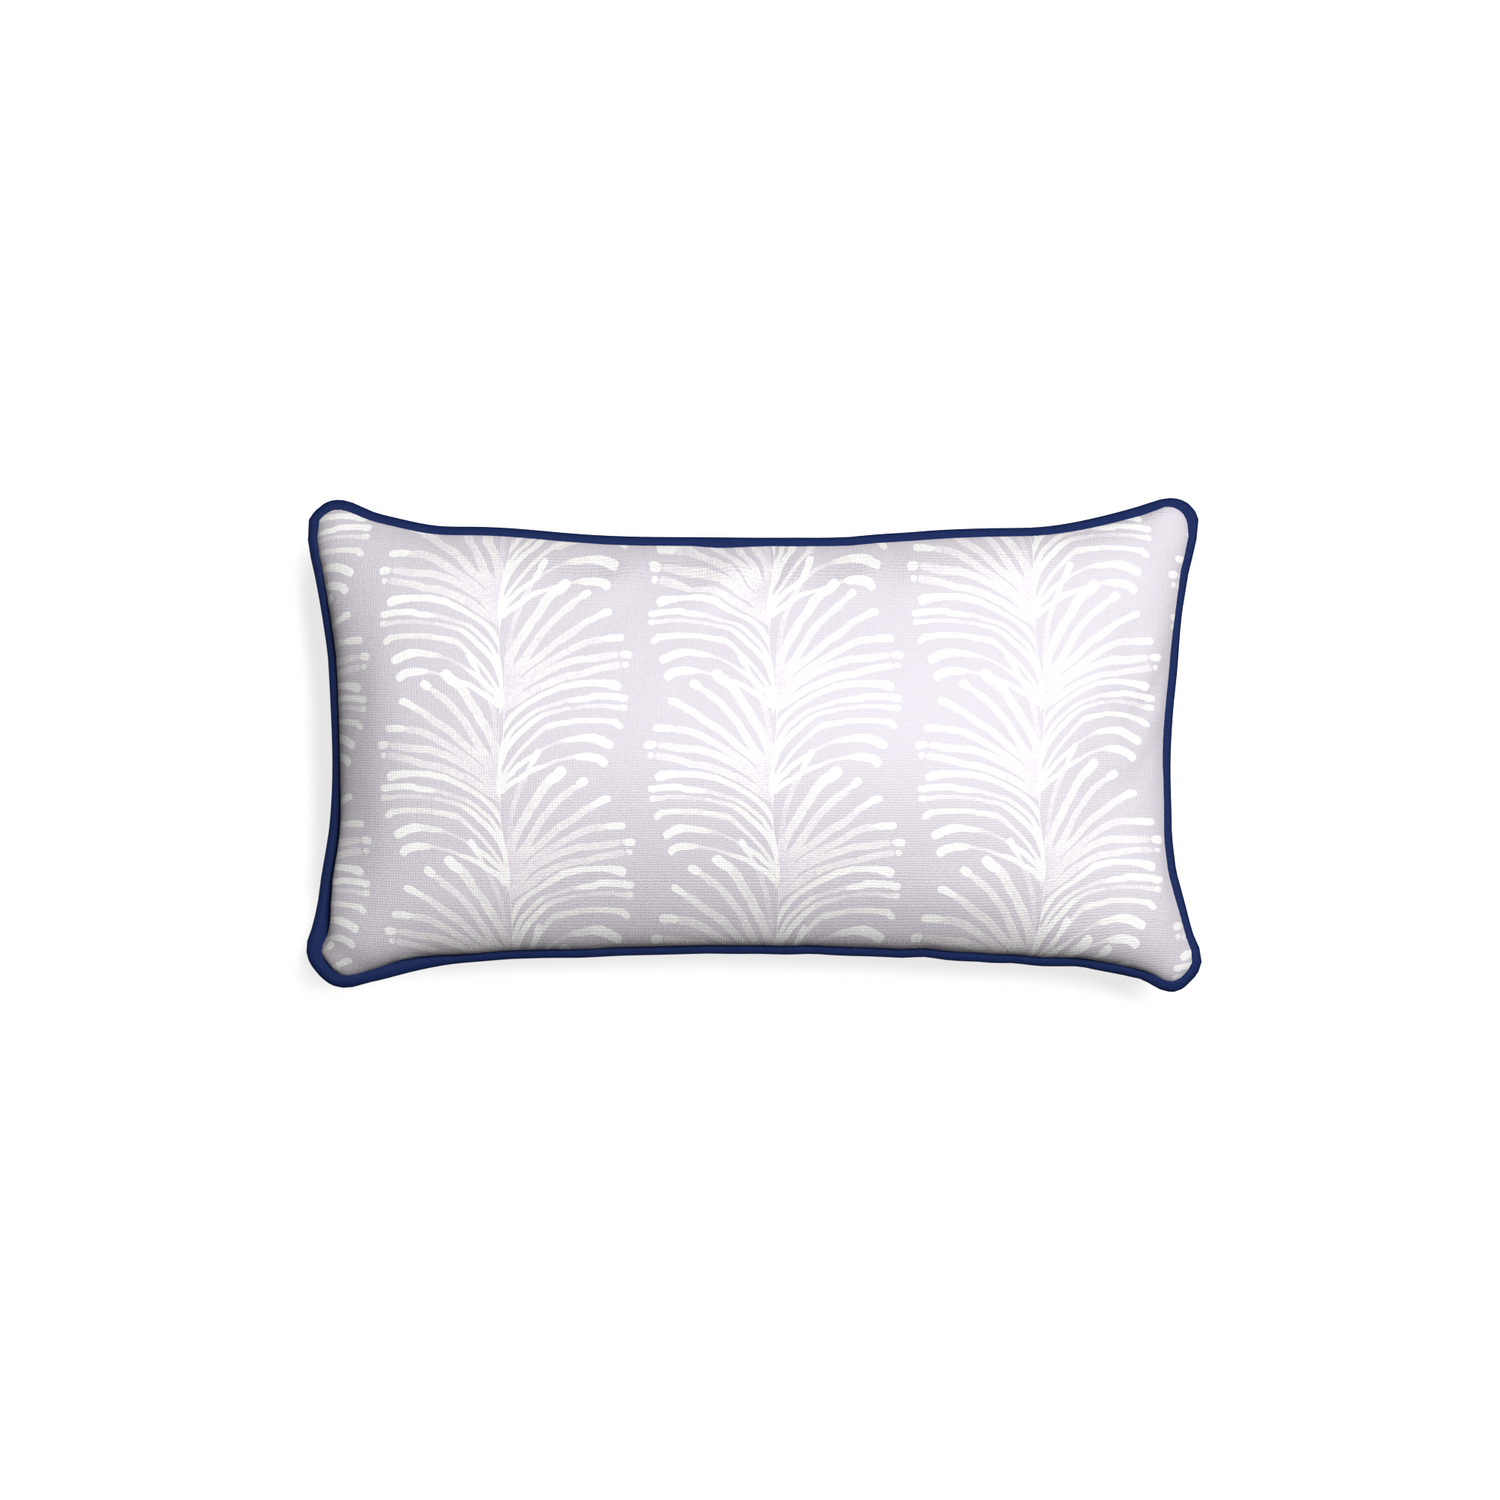 Petite-lumbar emma lavender custom lavender botanical stripepillow with midnight piping on white background